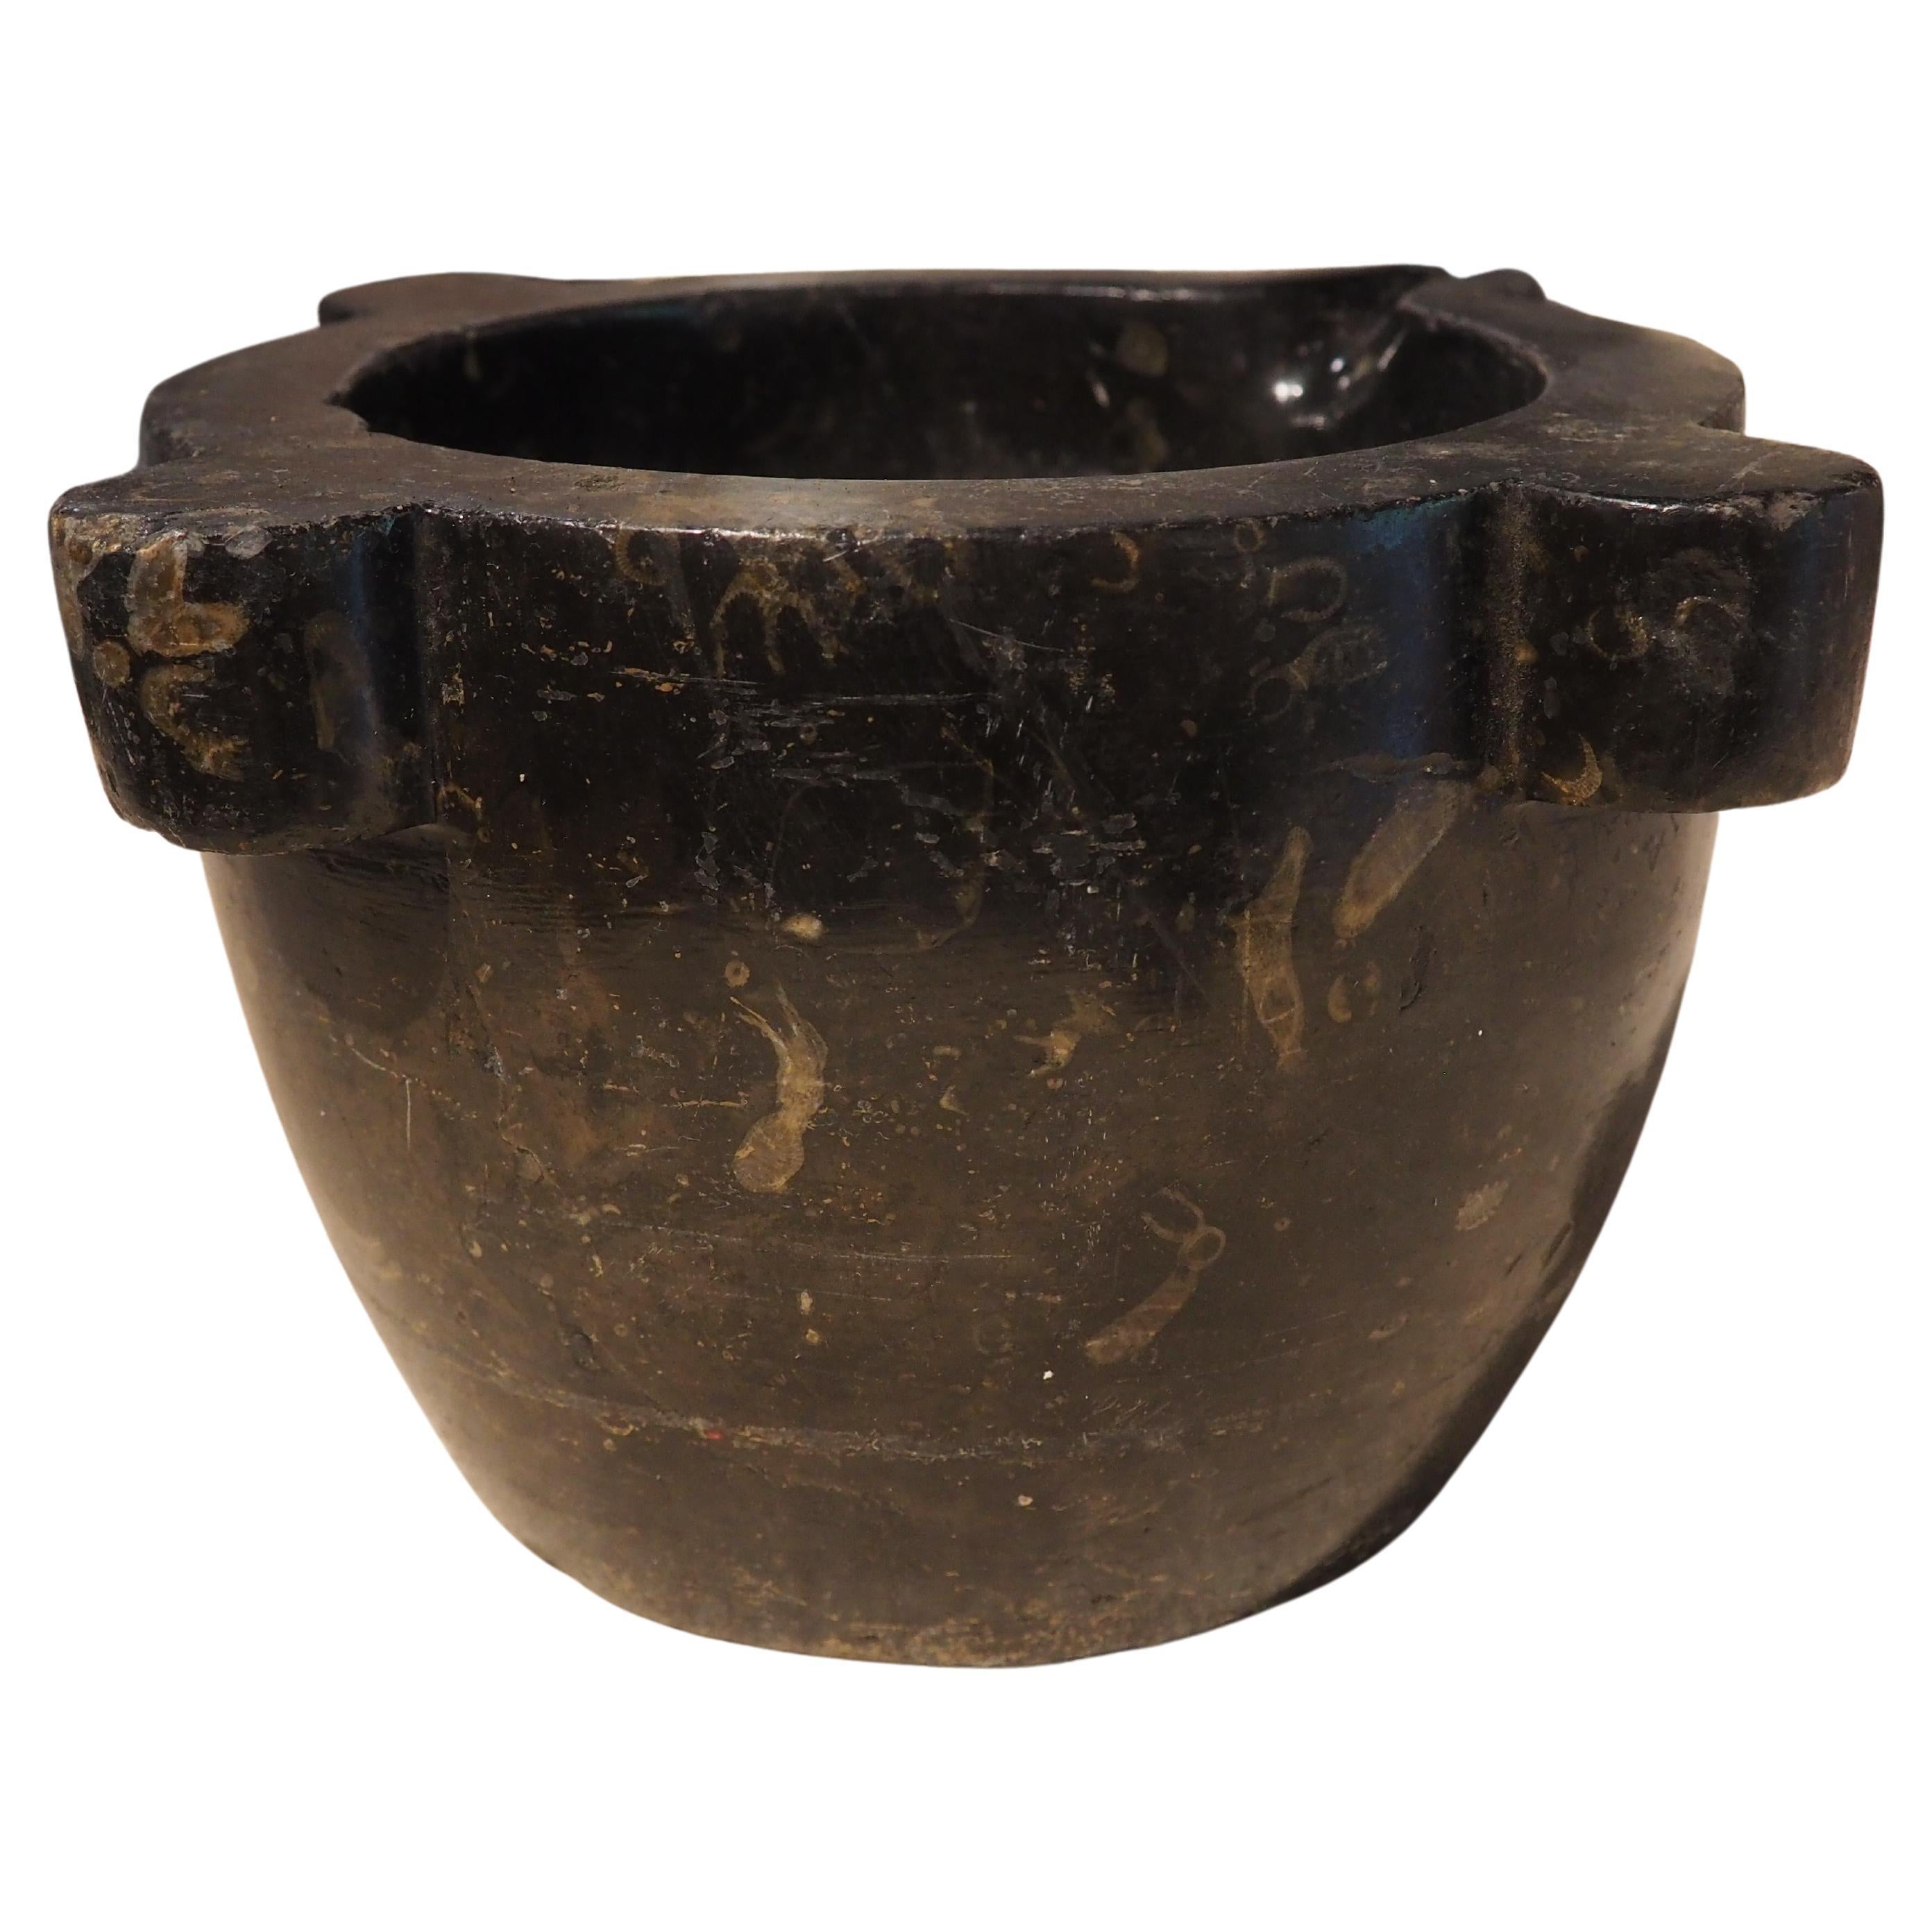 Antique Deep Black Marble Mortar from France, 19th Century